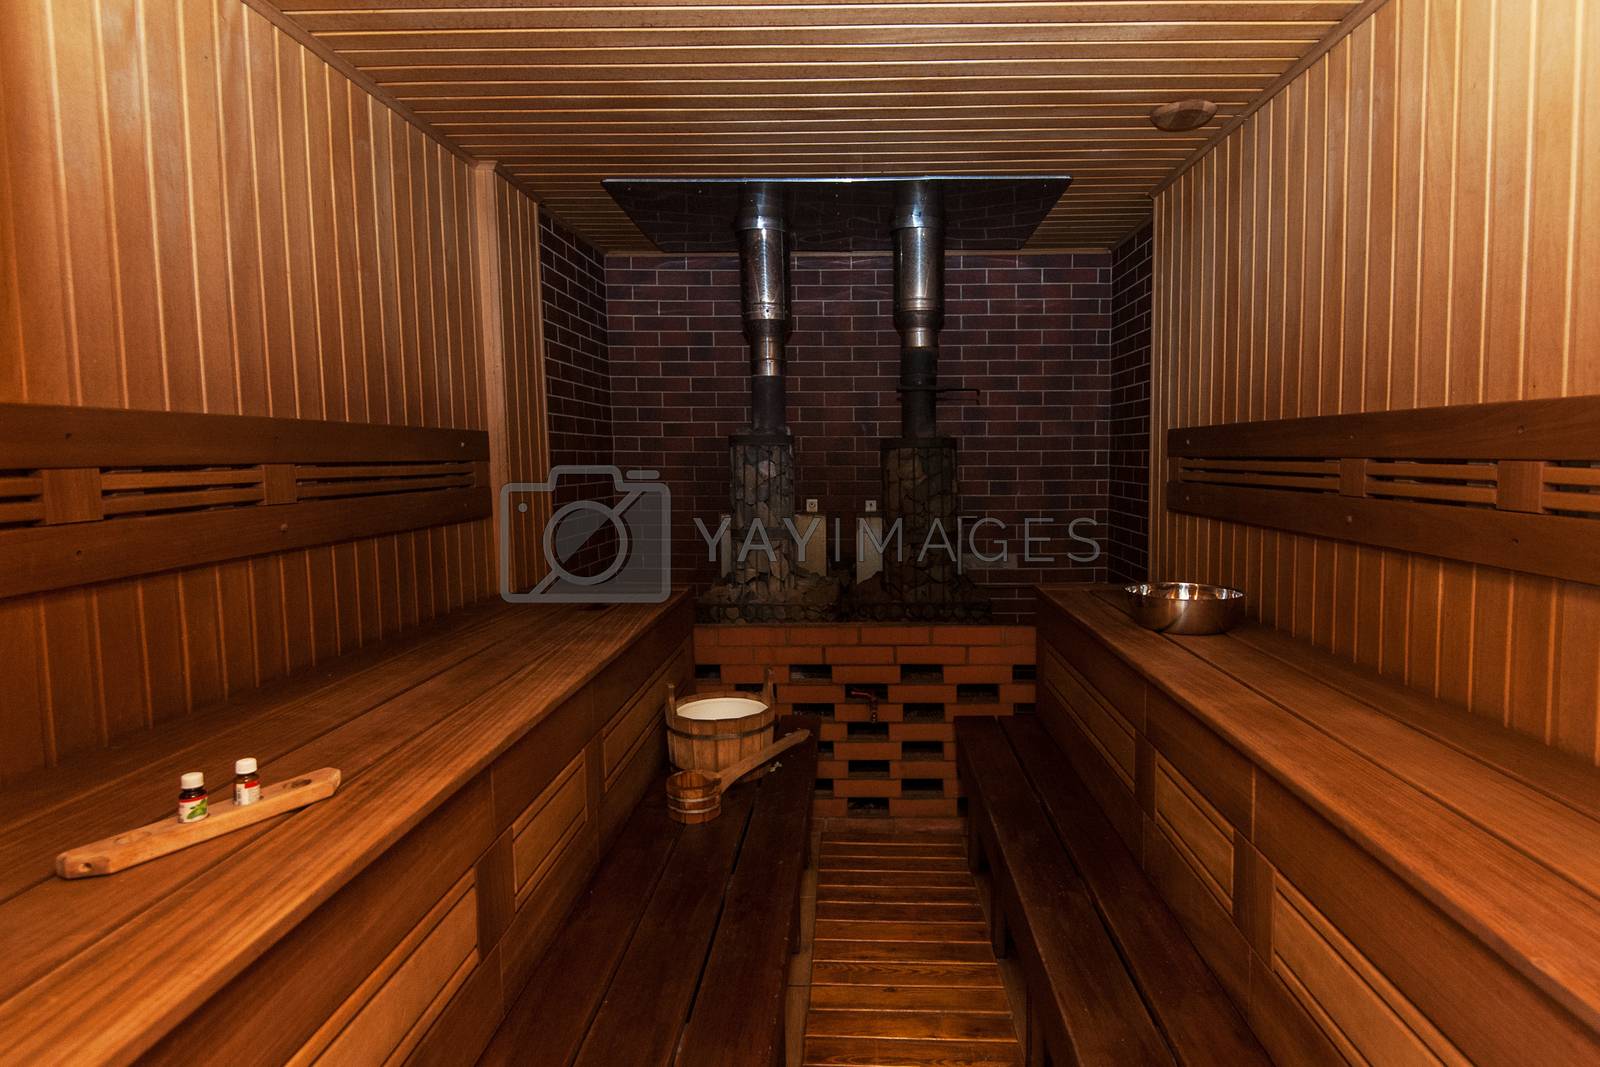 Royalty free image of Russian sauna interier by rusak